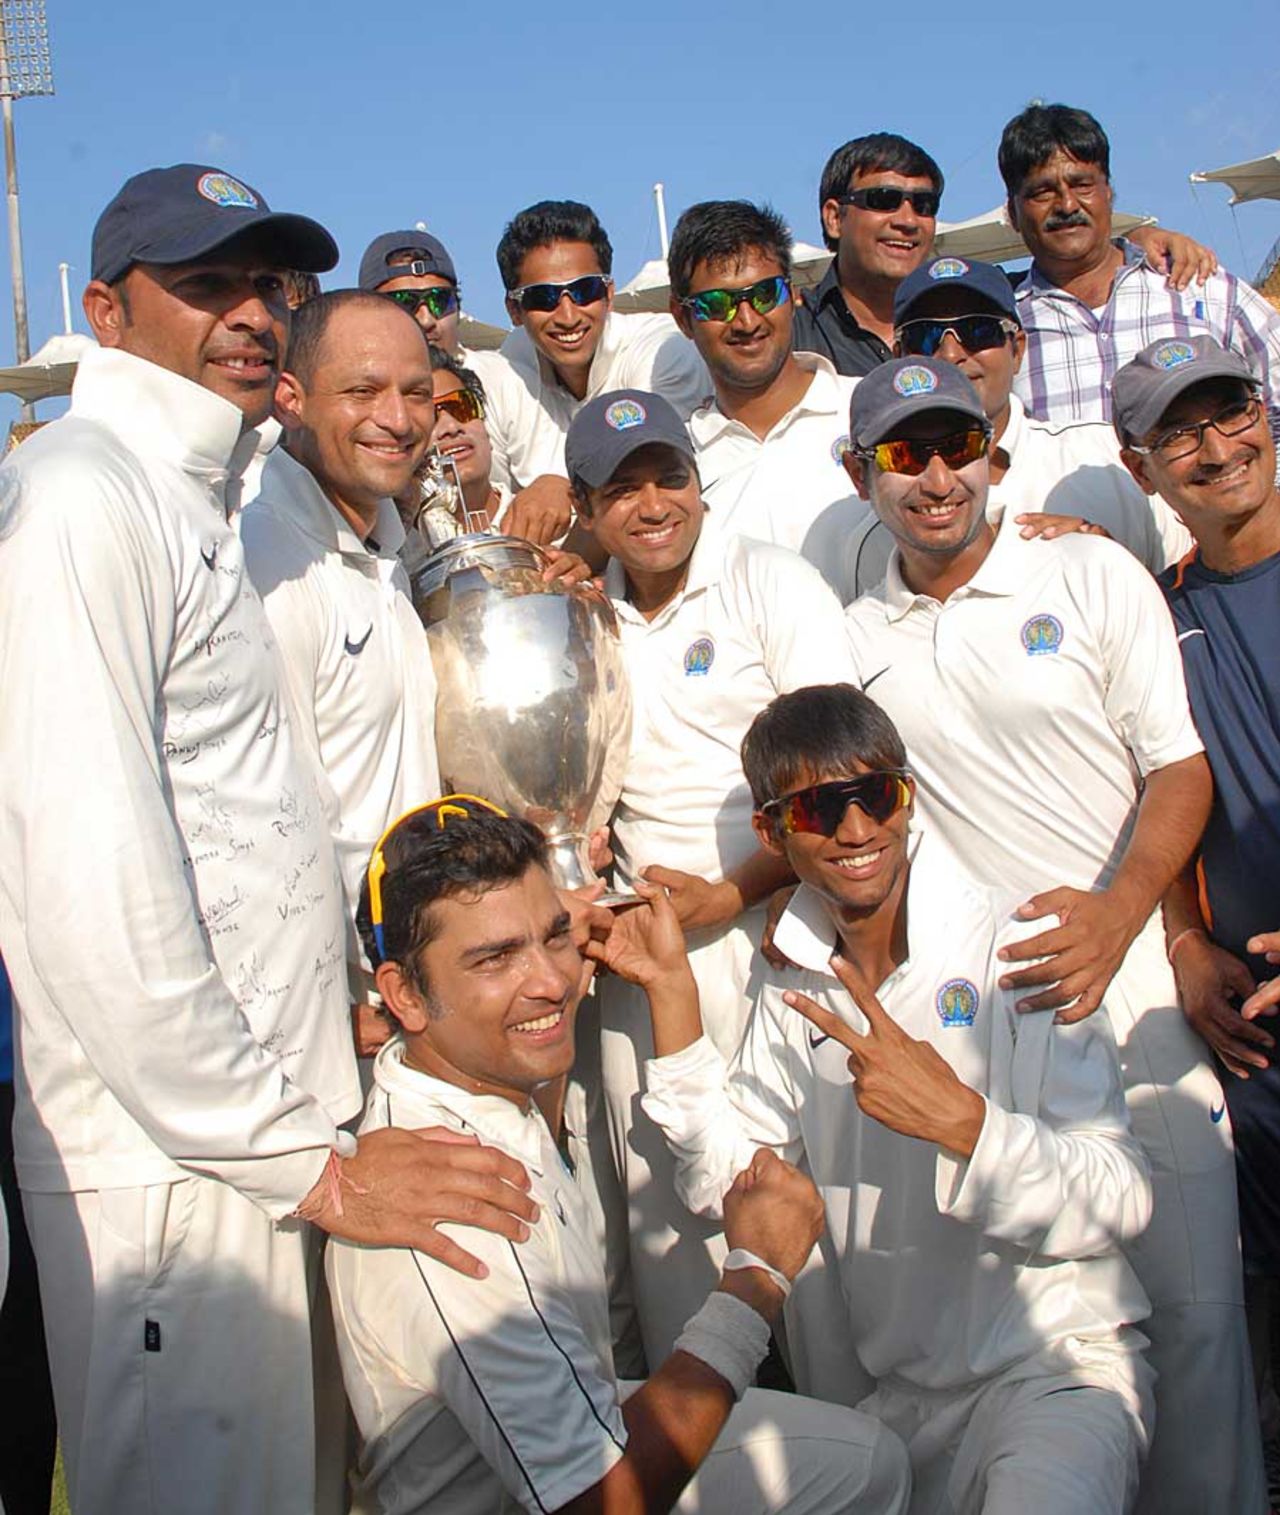 The Rajasthan players are all smiles, Tamil Nadu v Rajasthan, Ranji Trophy final, Chennai, 5th day, January 23, 2012